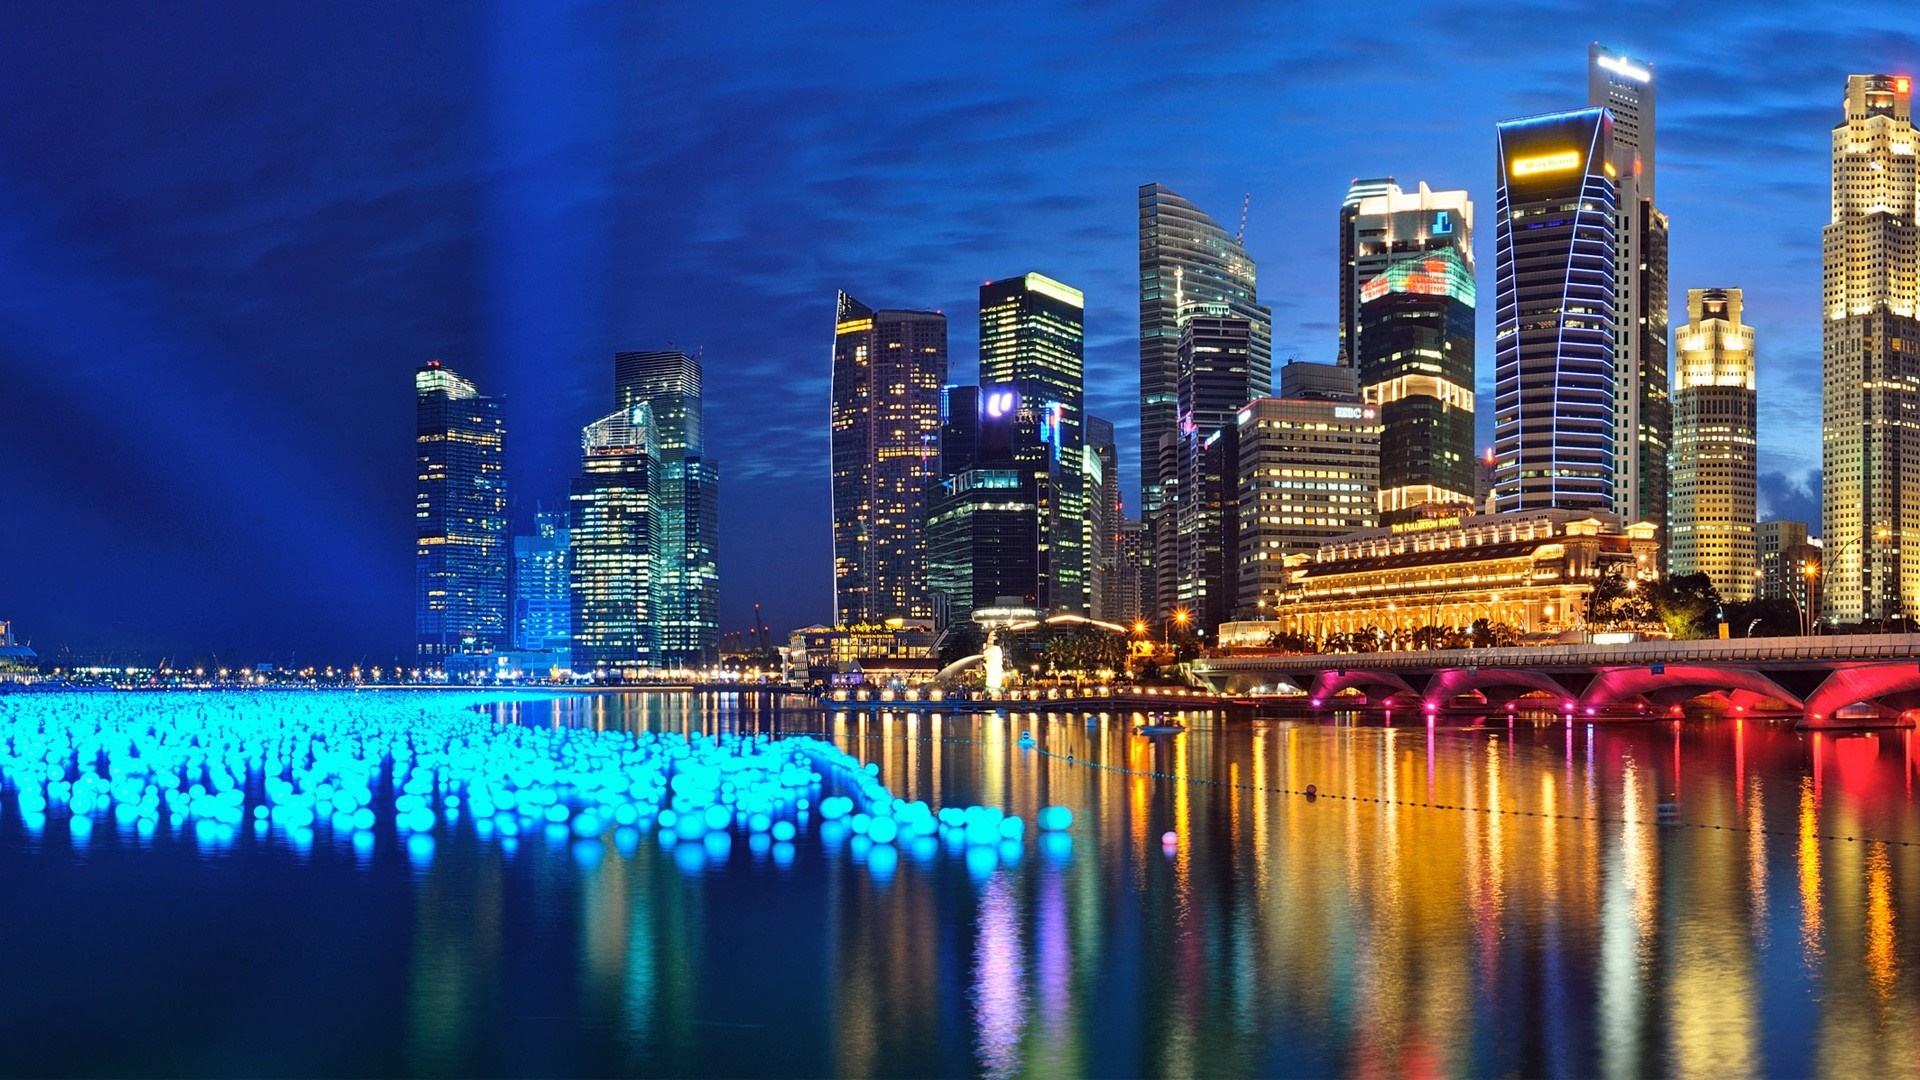 Singapore City At Night Wallpaper, Hd City 4K Wallpapers, Images And